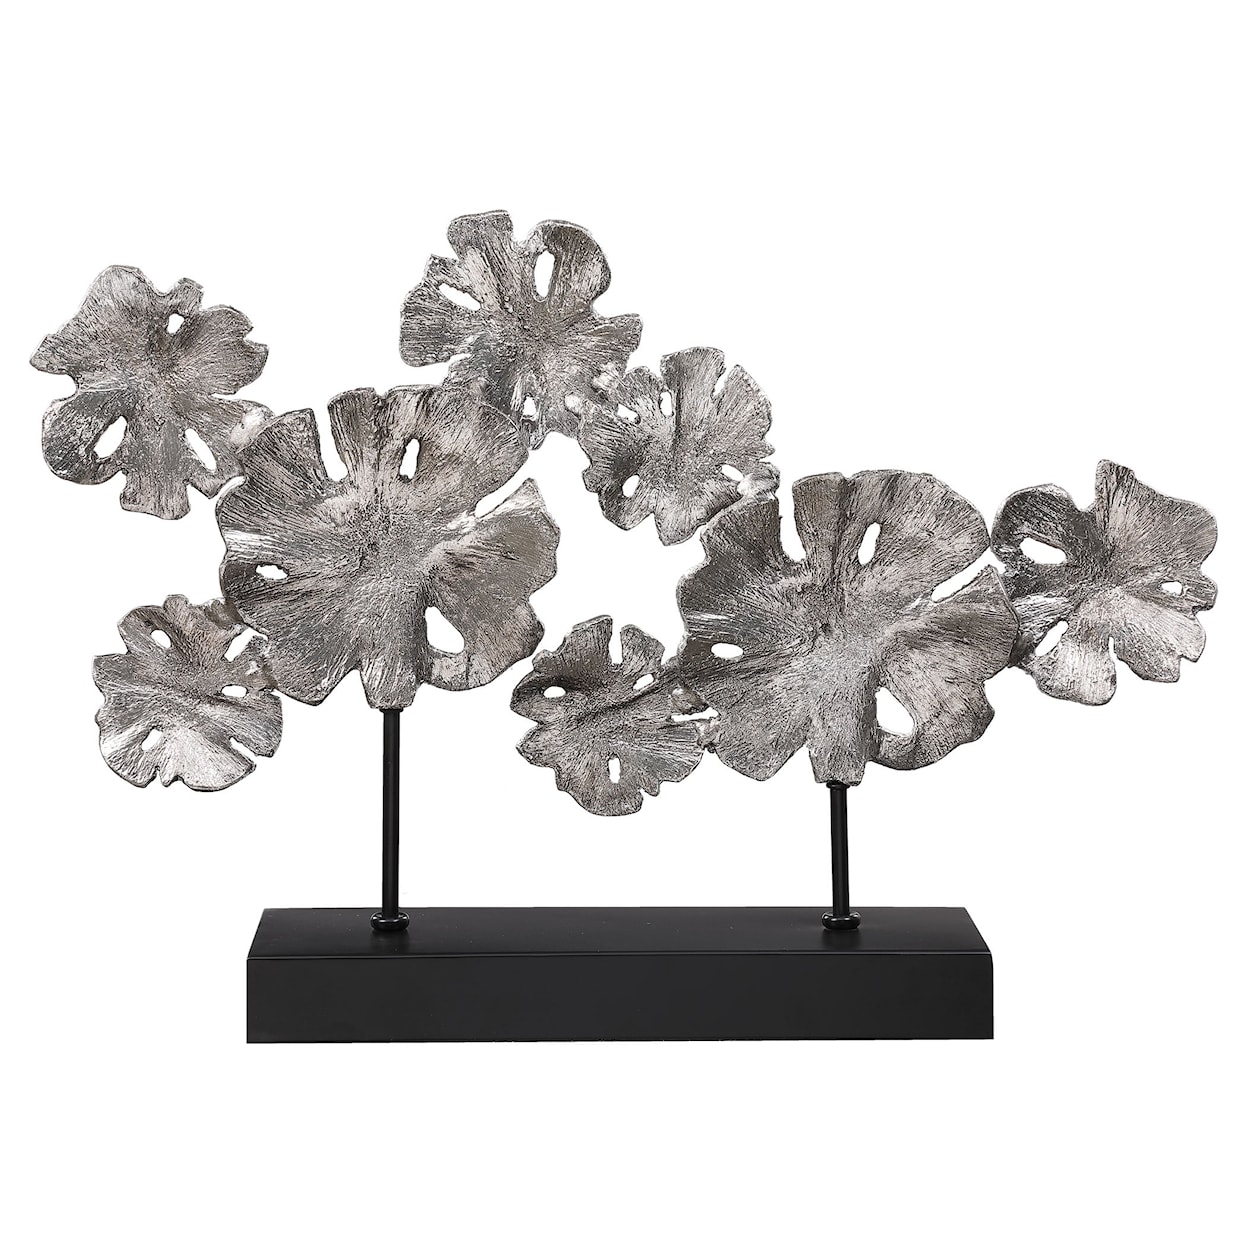 Uttermost Accessories - Statues and Figurines Lotus Sculpture